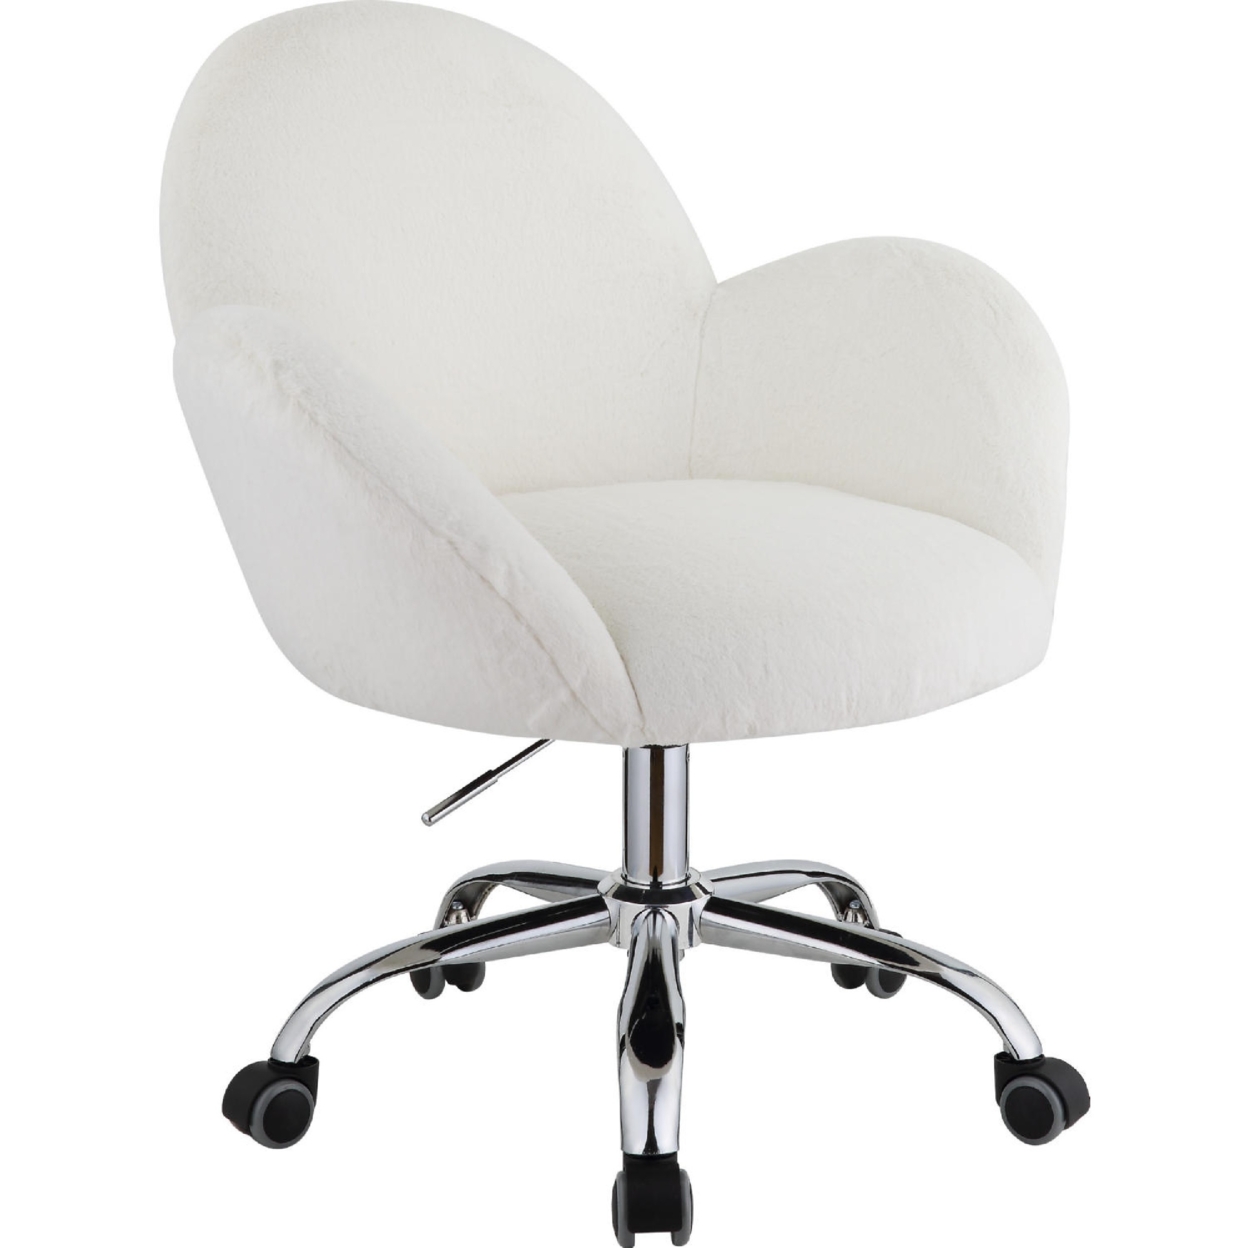 Swivel Office Chair With Rounded Back And Arms, White And Chrome- Saltoro Sherpi